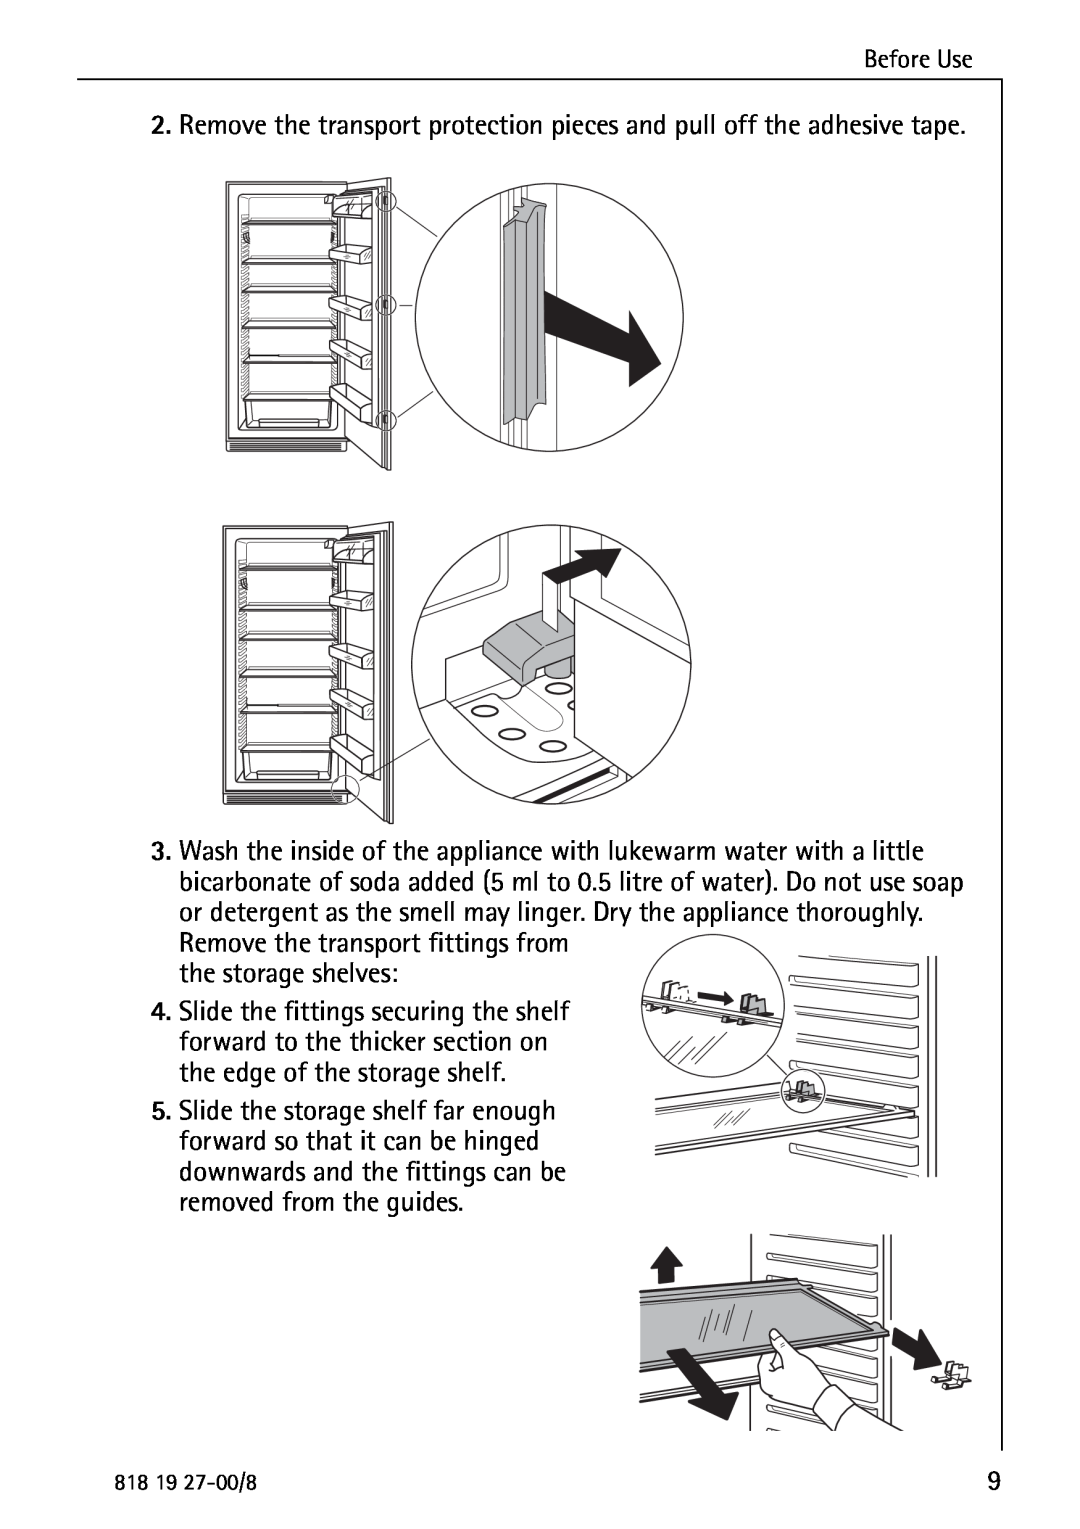 Electrolux Upright Refrigerator manual Remove the transport fittings from the storage shelves 